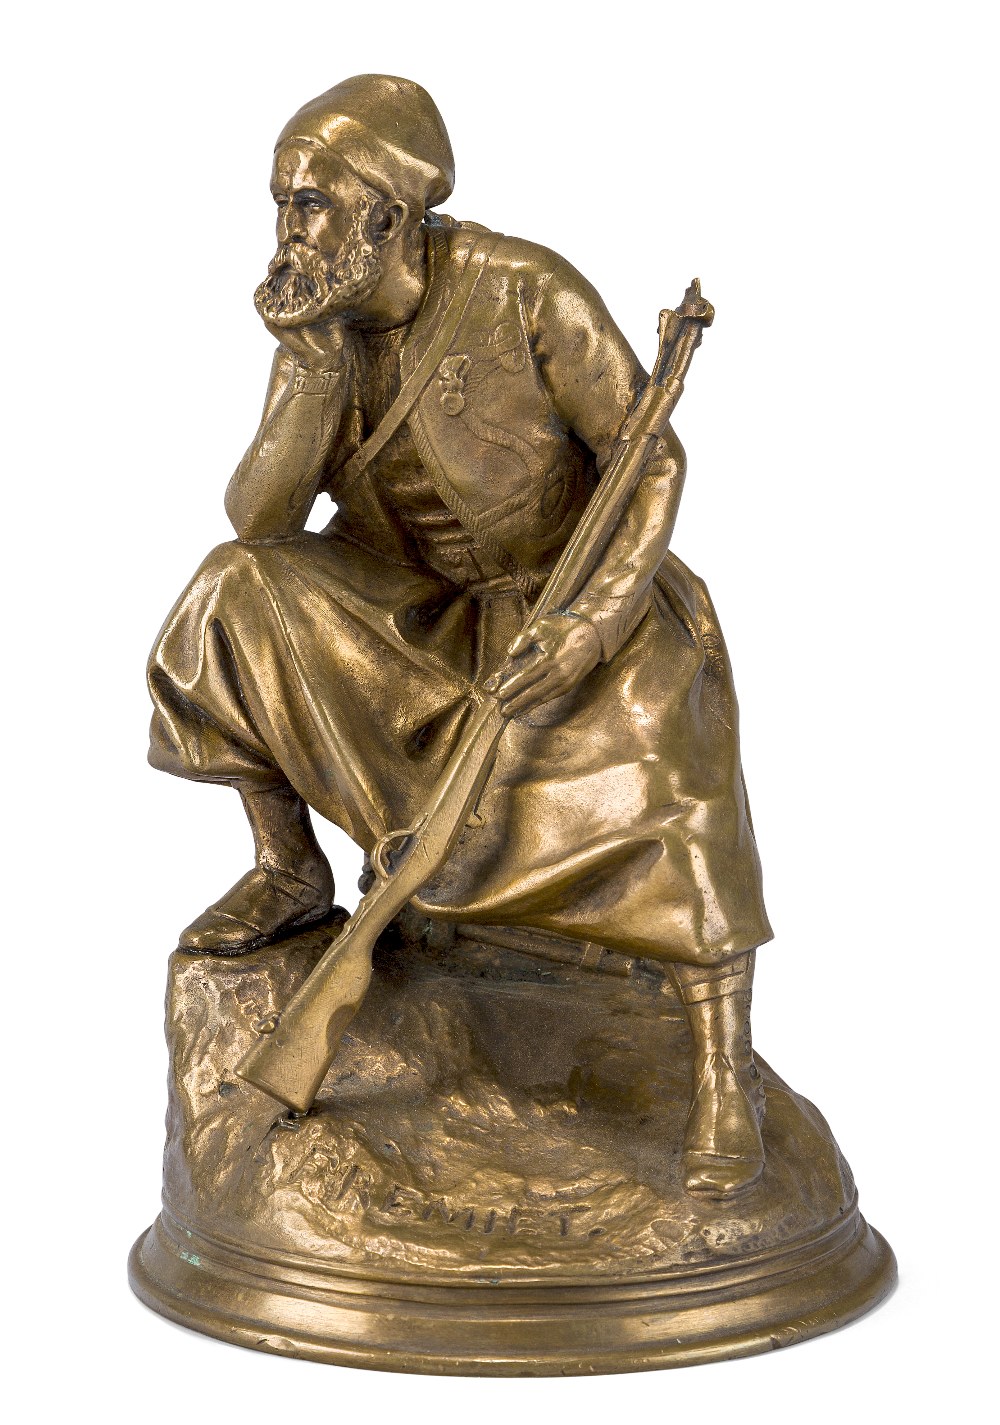 After Emmanuel Fremiet, French, 1824-1910, a polished bronze model of a Turk, late 19th century,